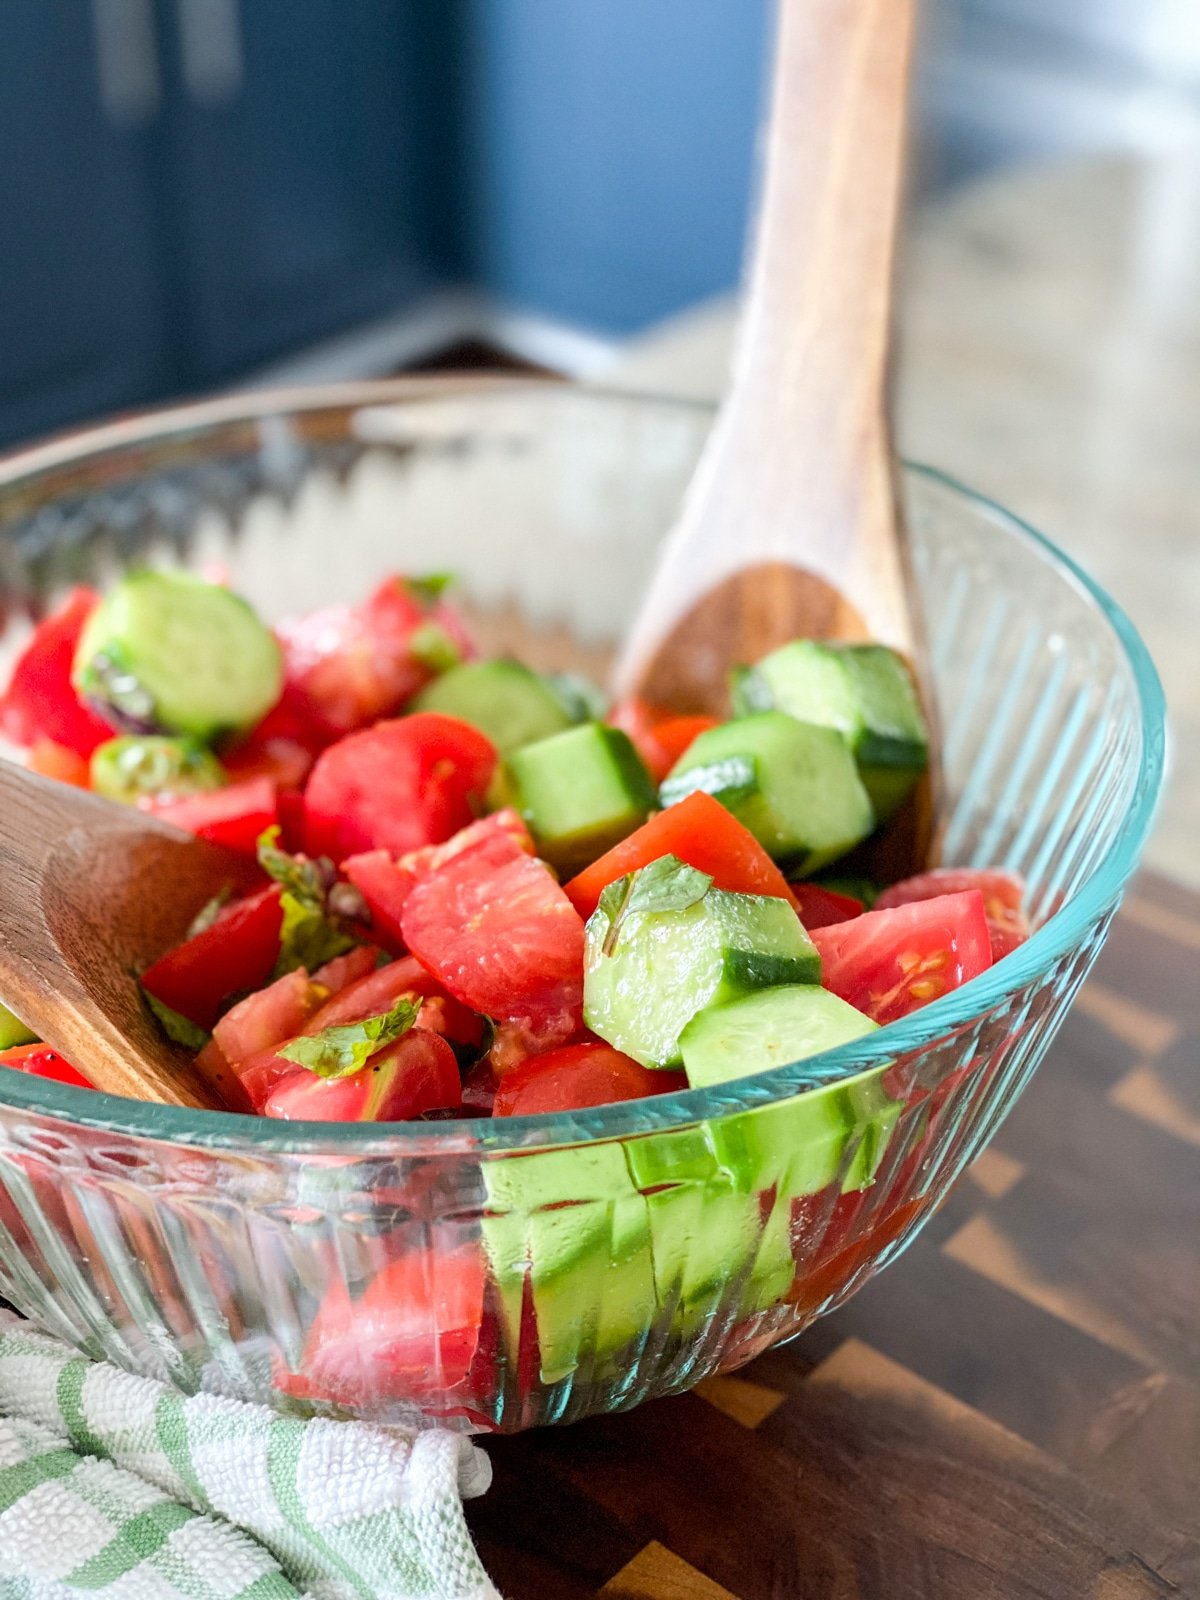 tossing the tomato cucumber salad marinated in vinegar